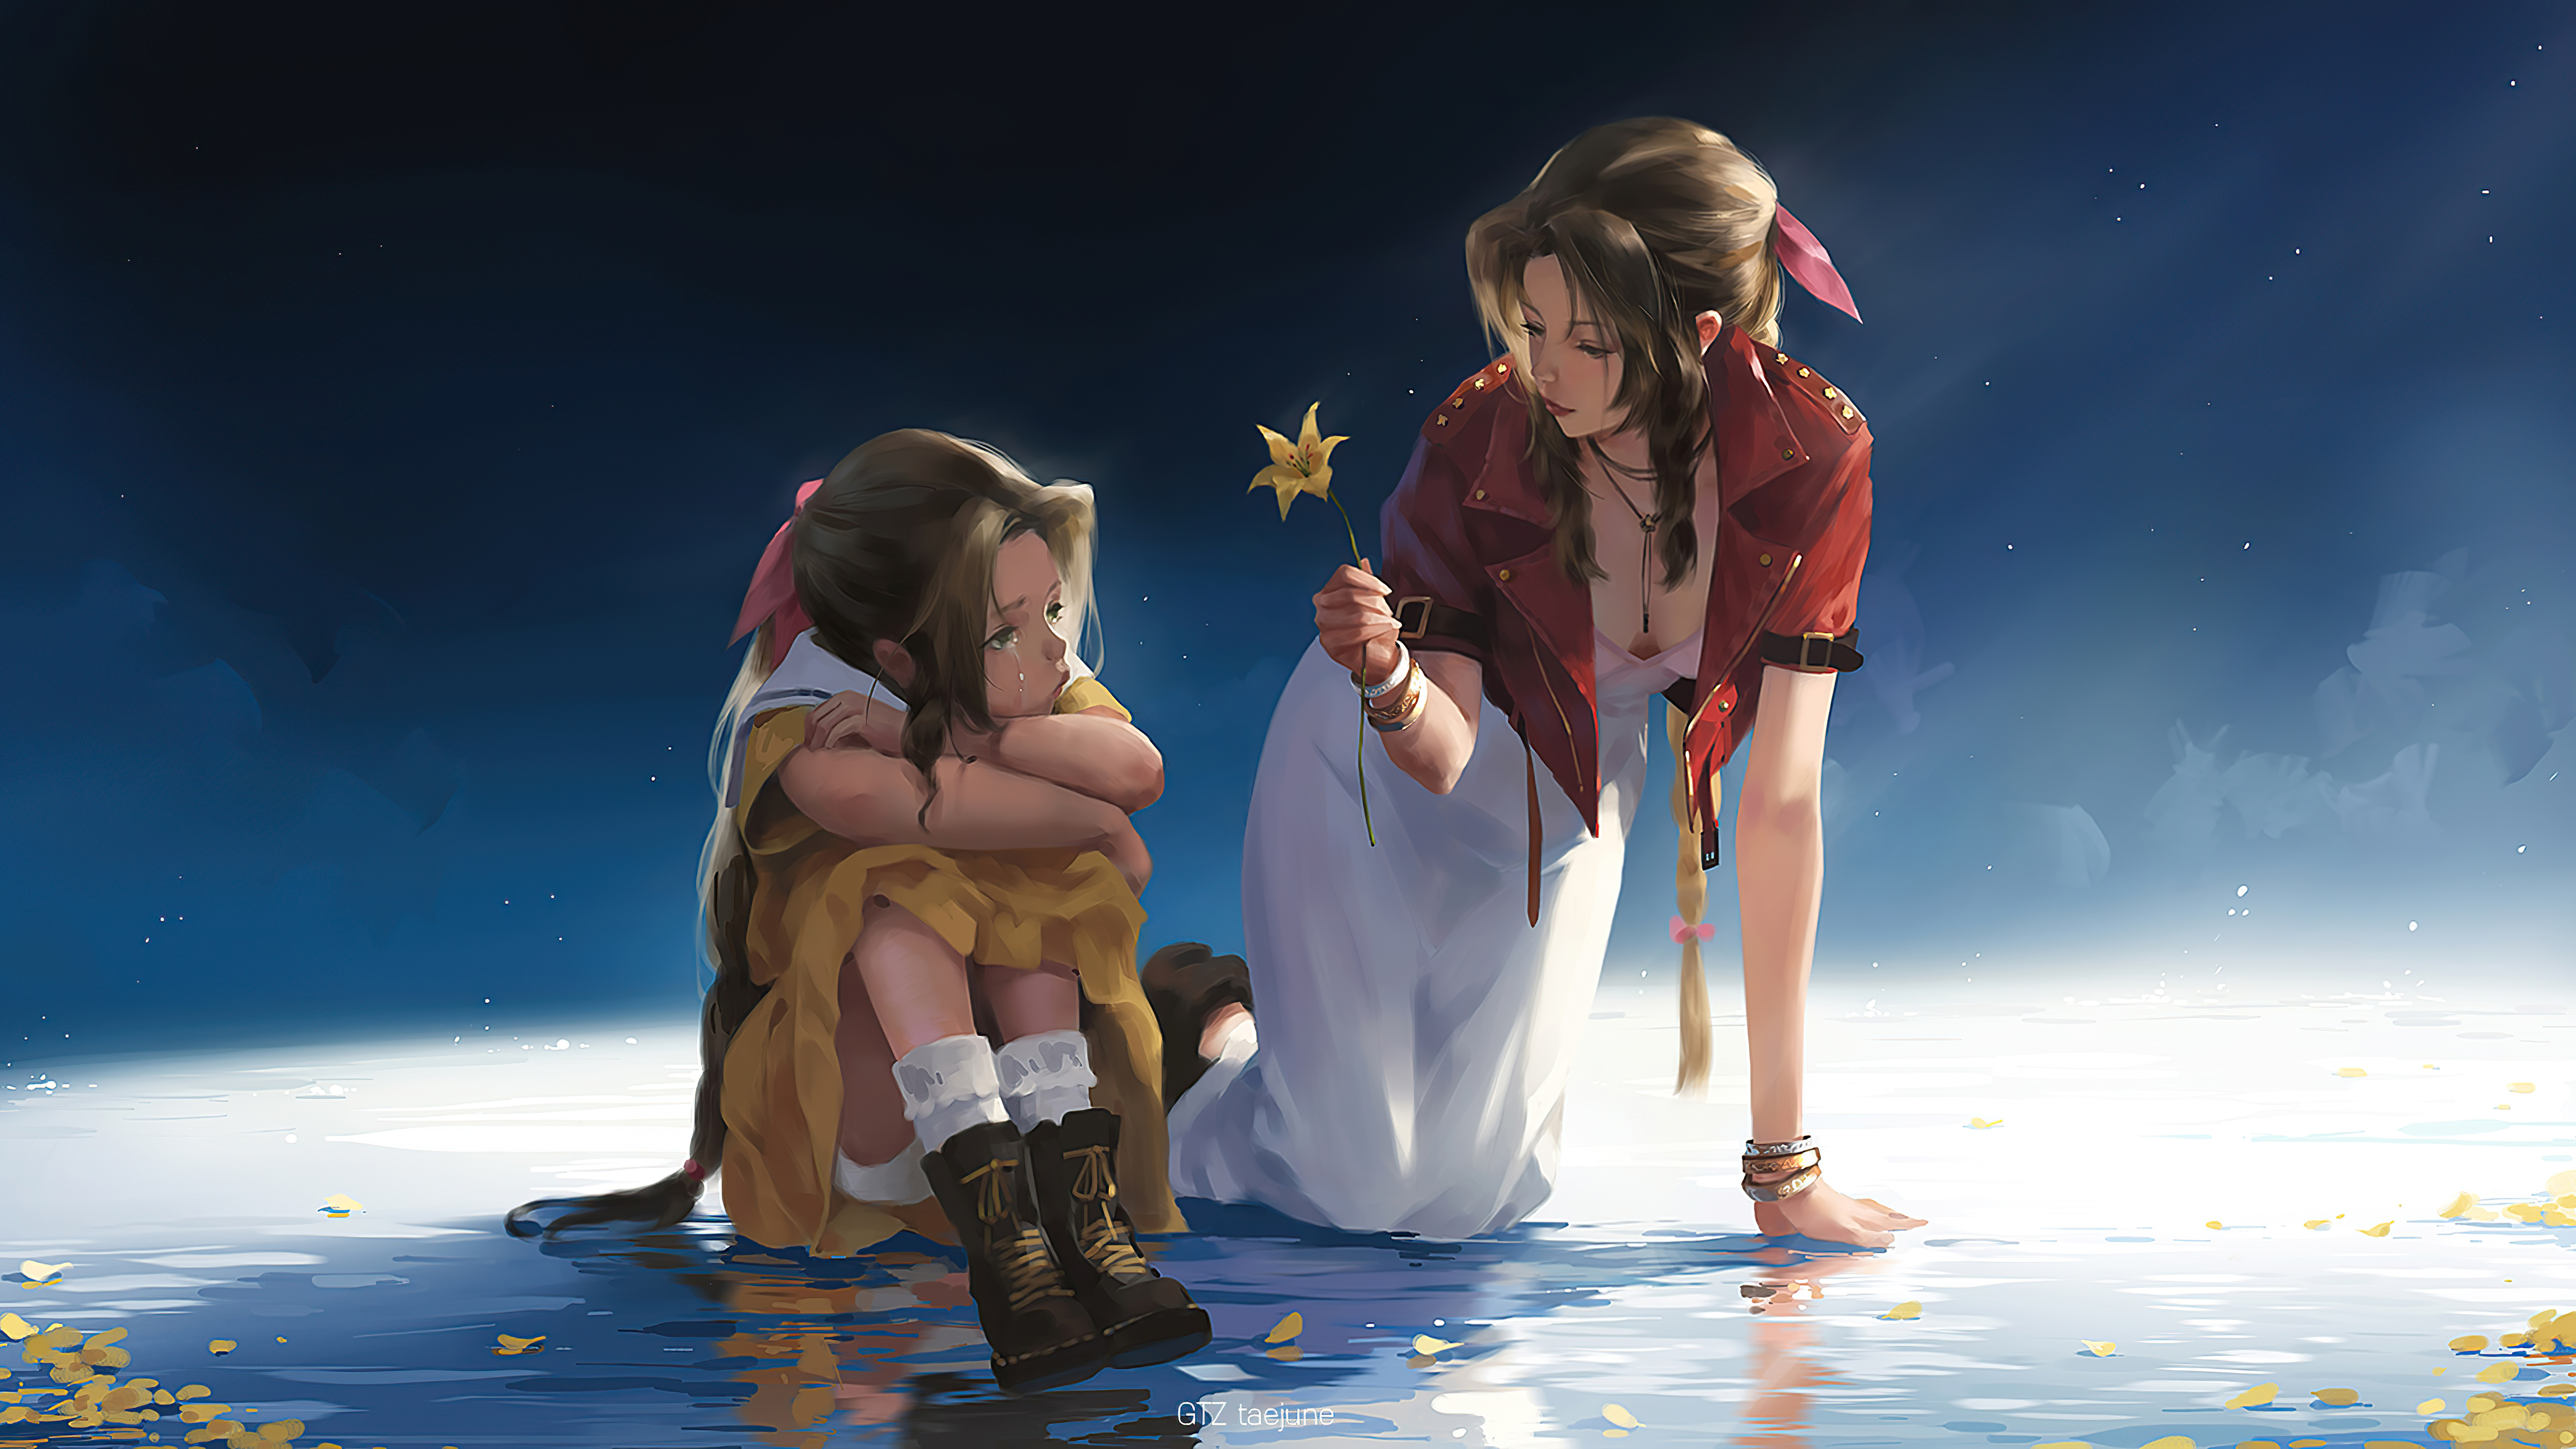 Final Fantasy Aerith Gainsborough 5k, HD Artist, 4k Wallpaper, Image, Background, Photo and Picture